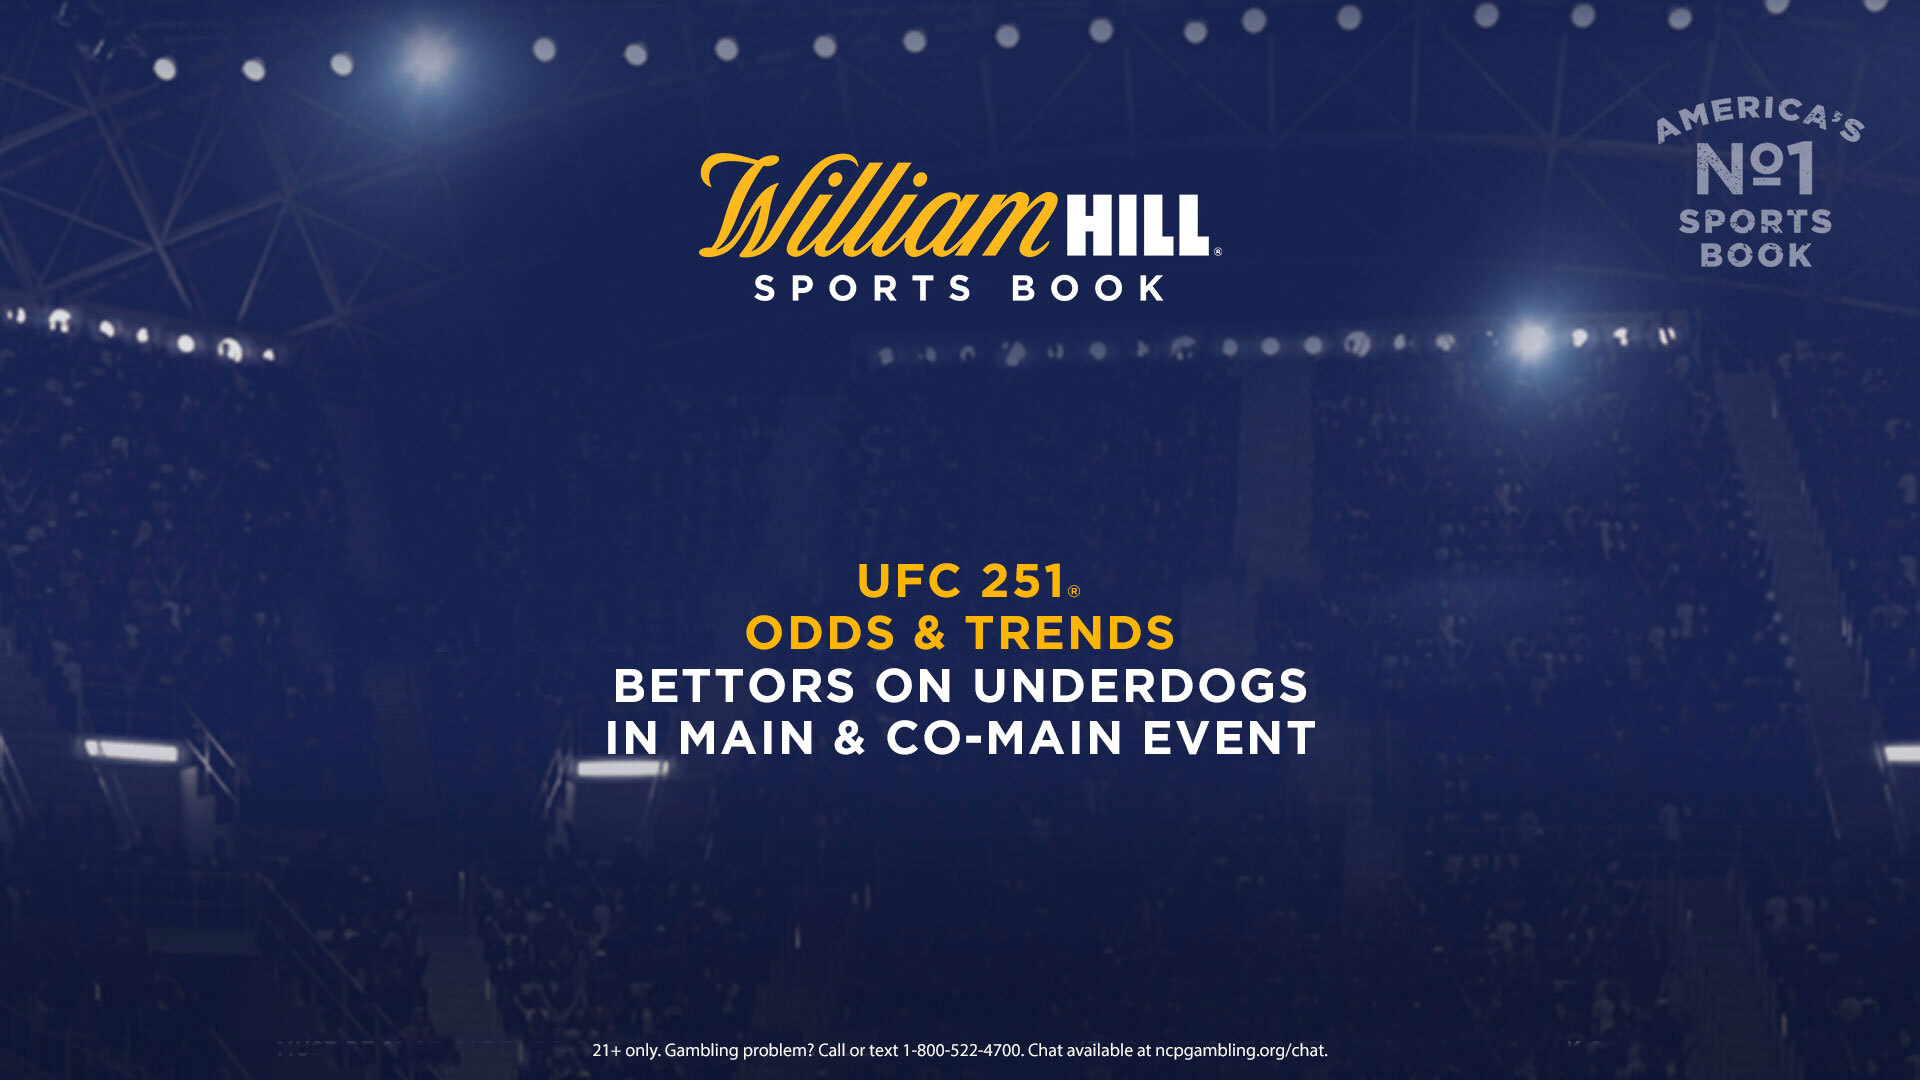 William hill betting boxing mma odds betting on next leicester manager